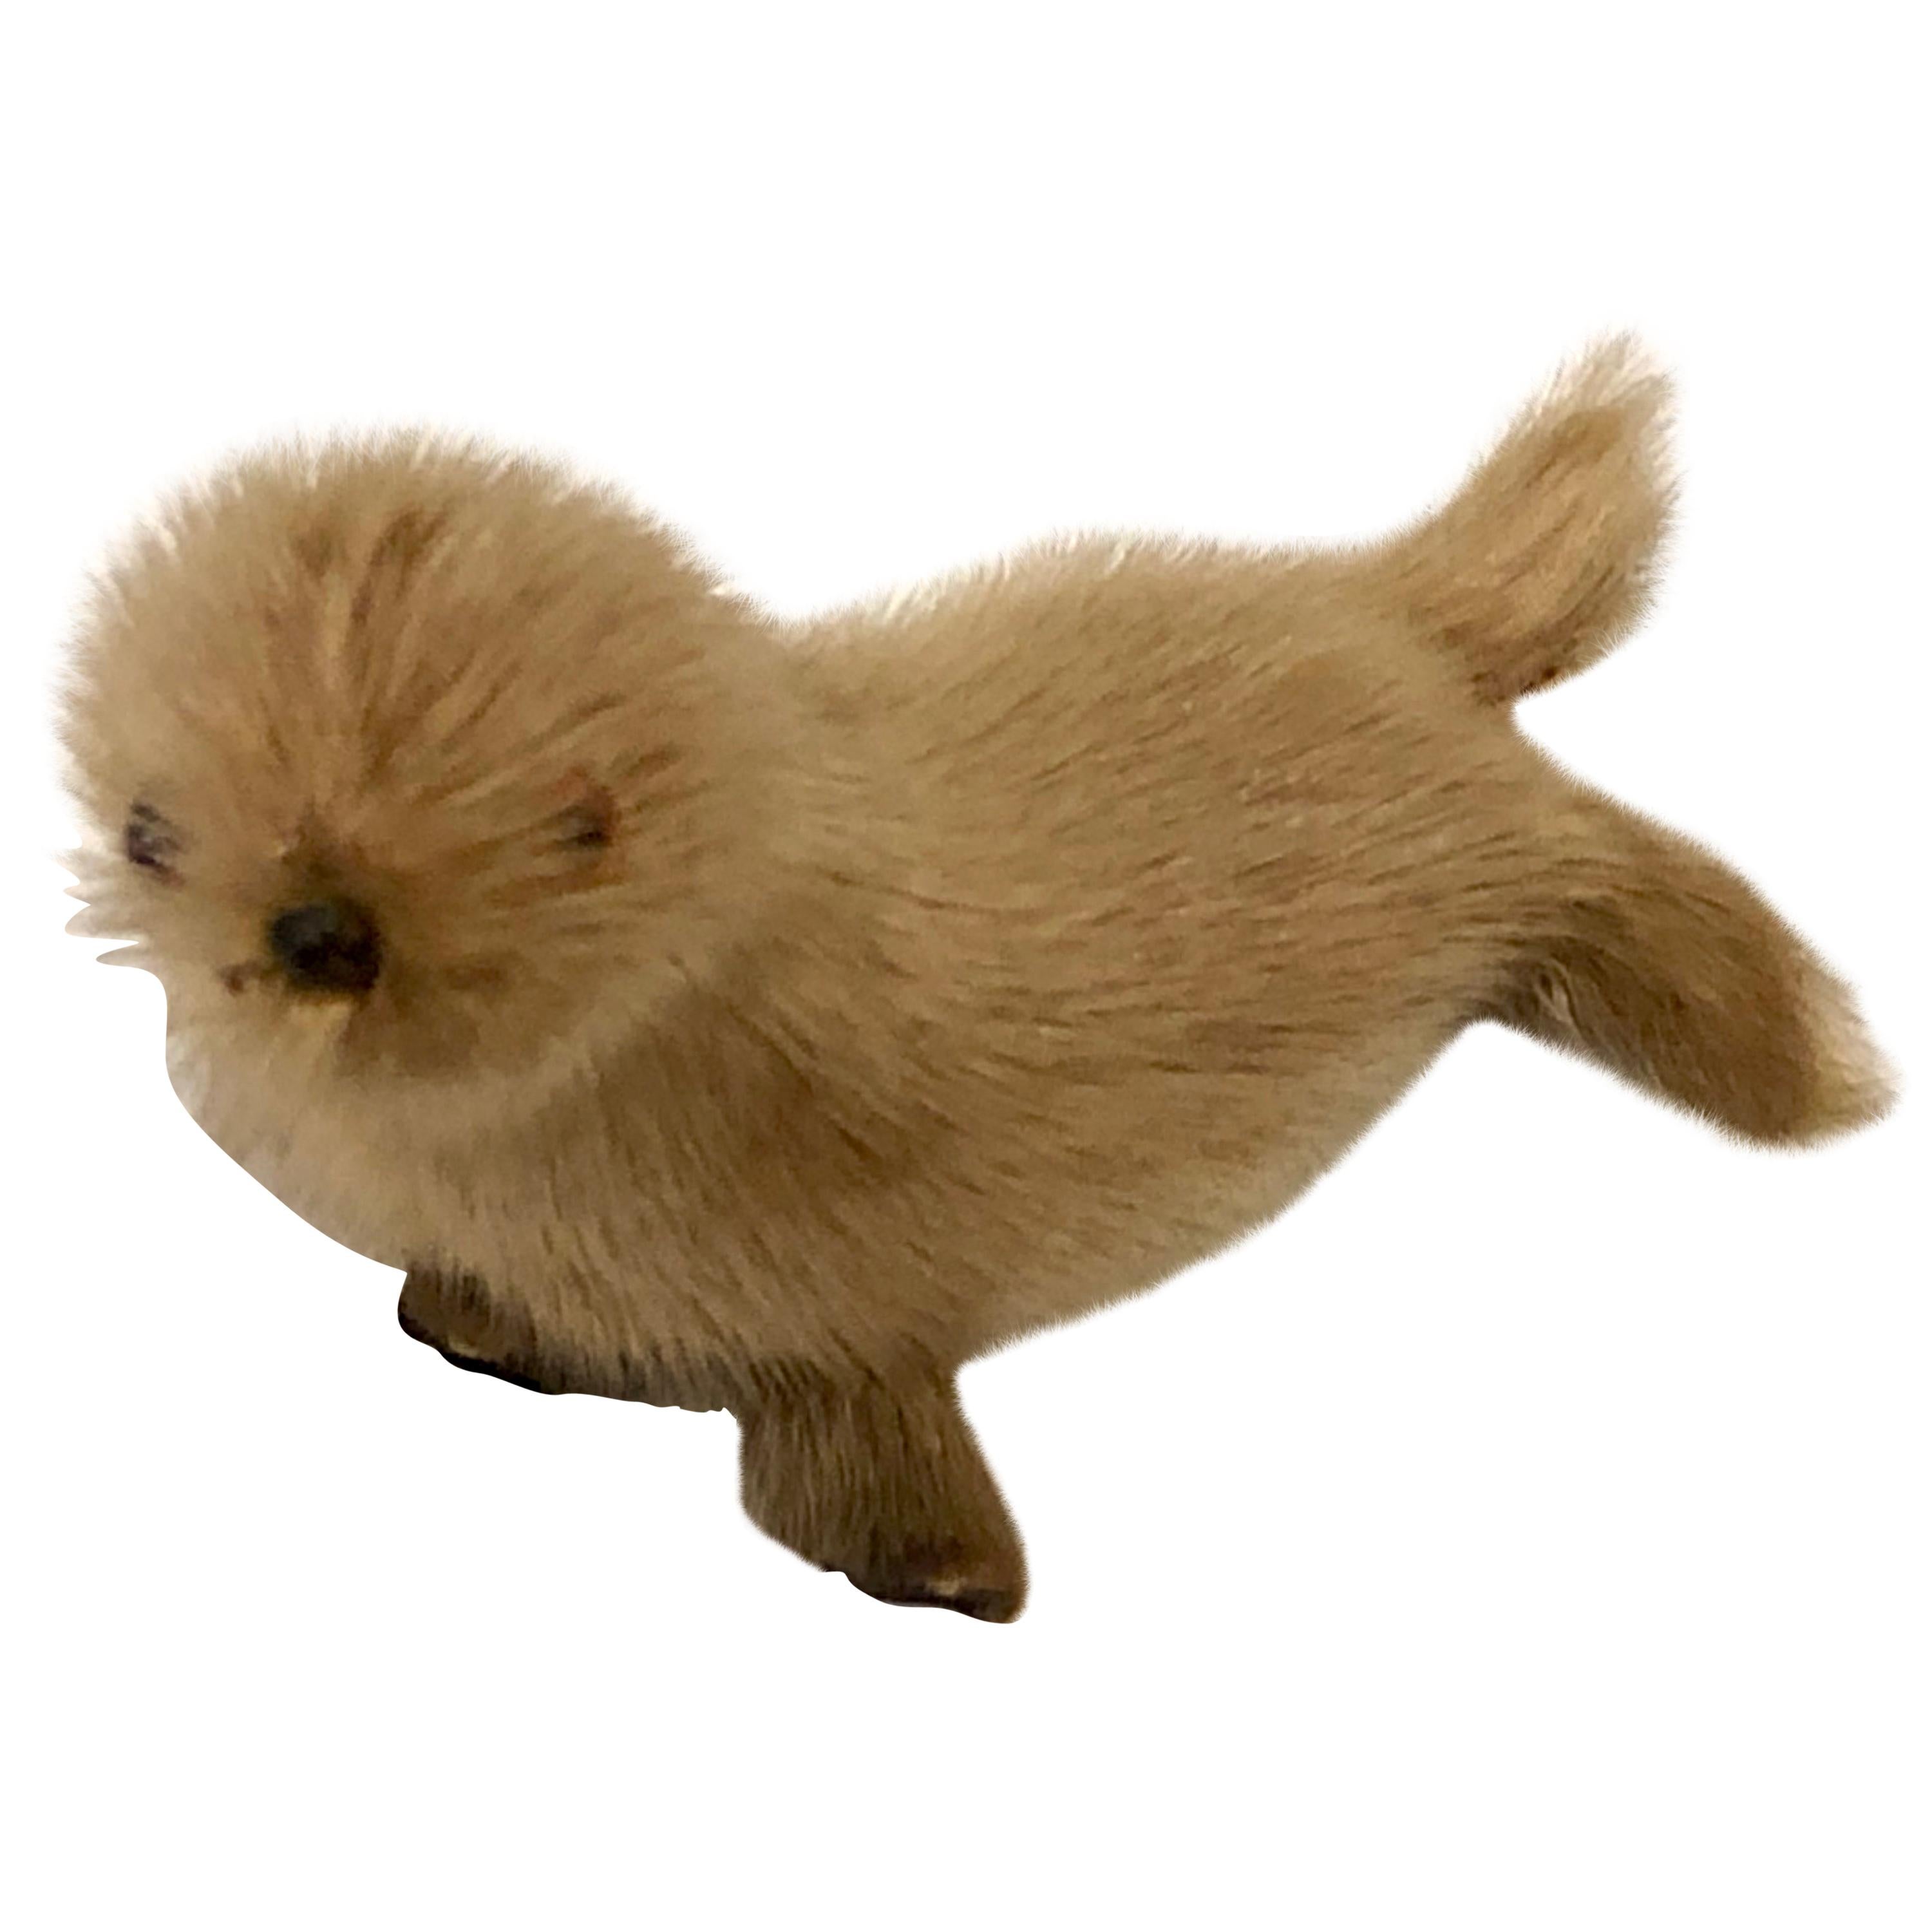 Small Vintage Seal Sculpture Made of Real Fur For Sale at 1stDibs